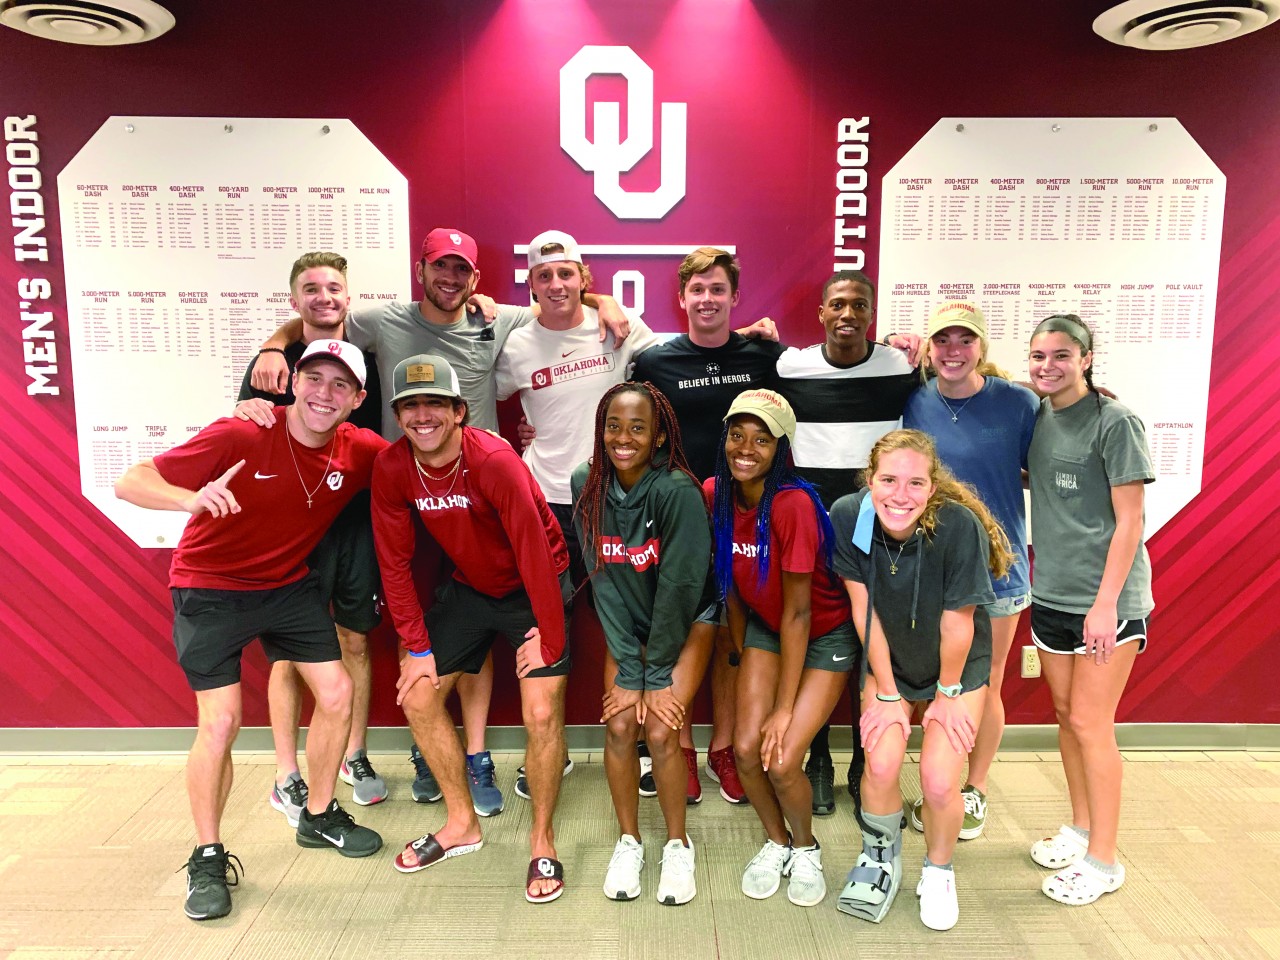 Adoh on the go: OU track athlete still serving God, has Olympic goals